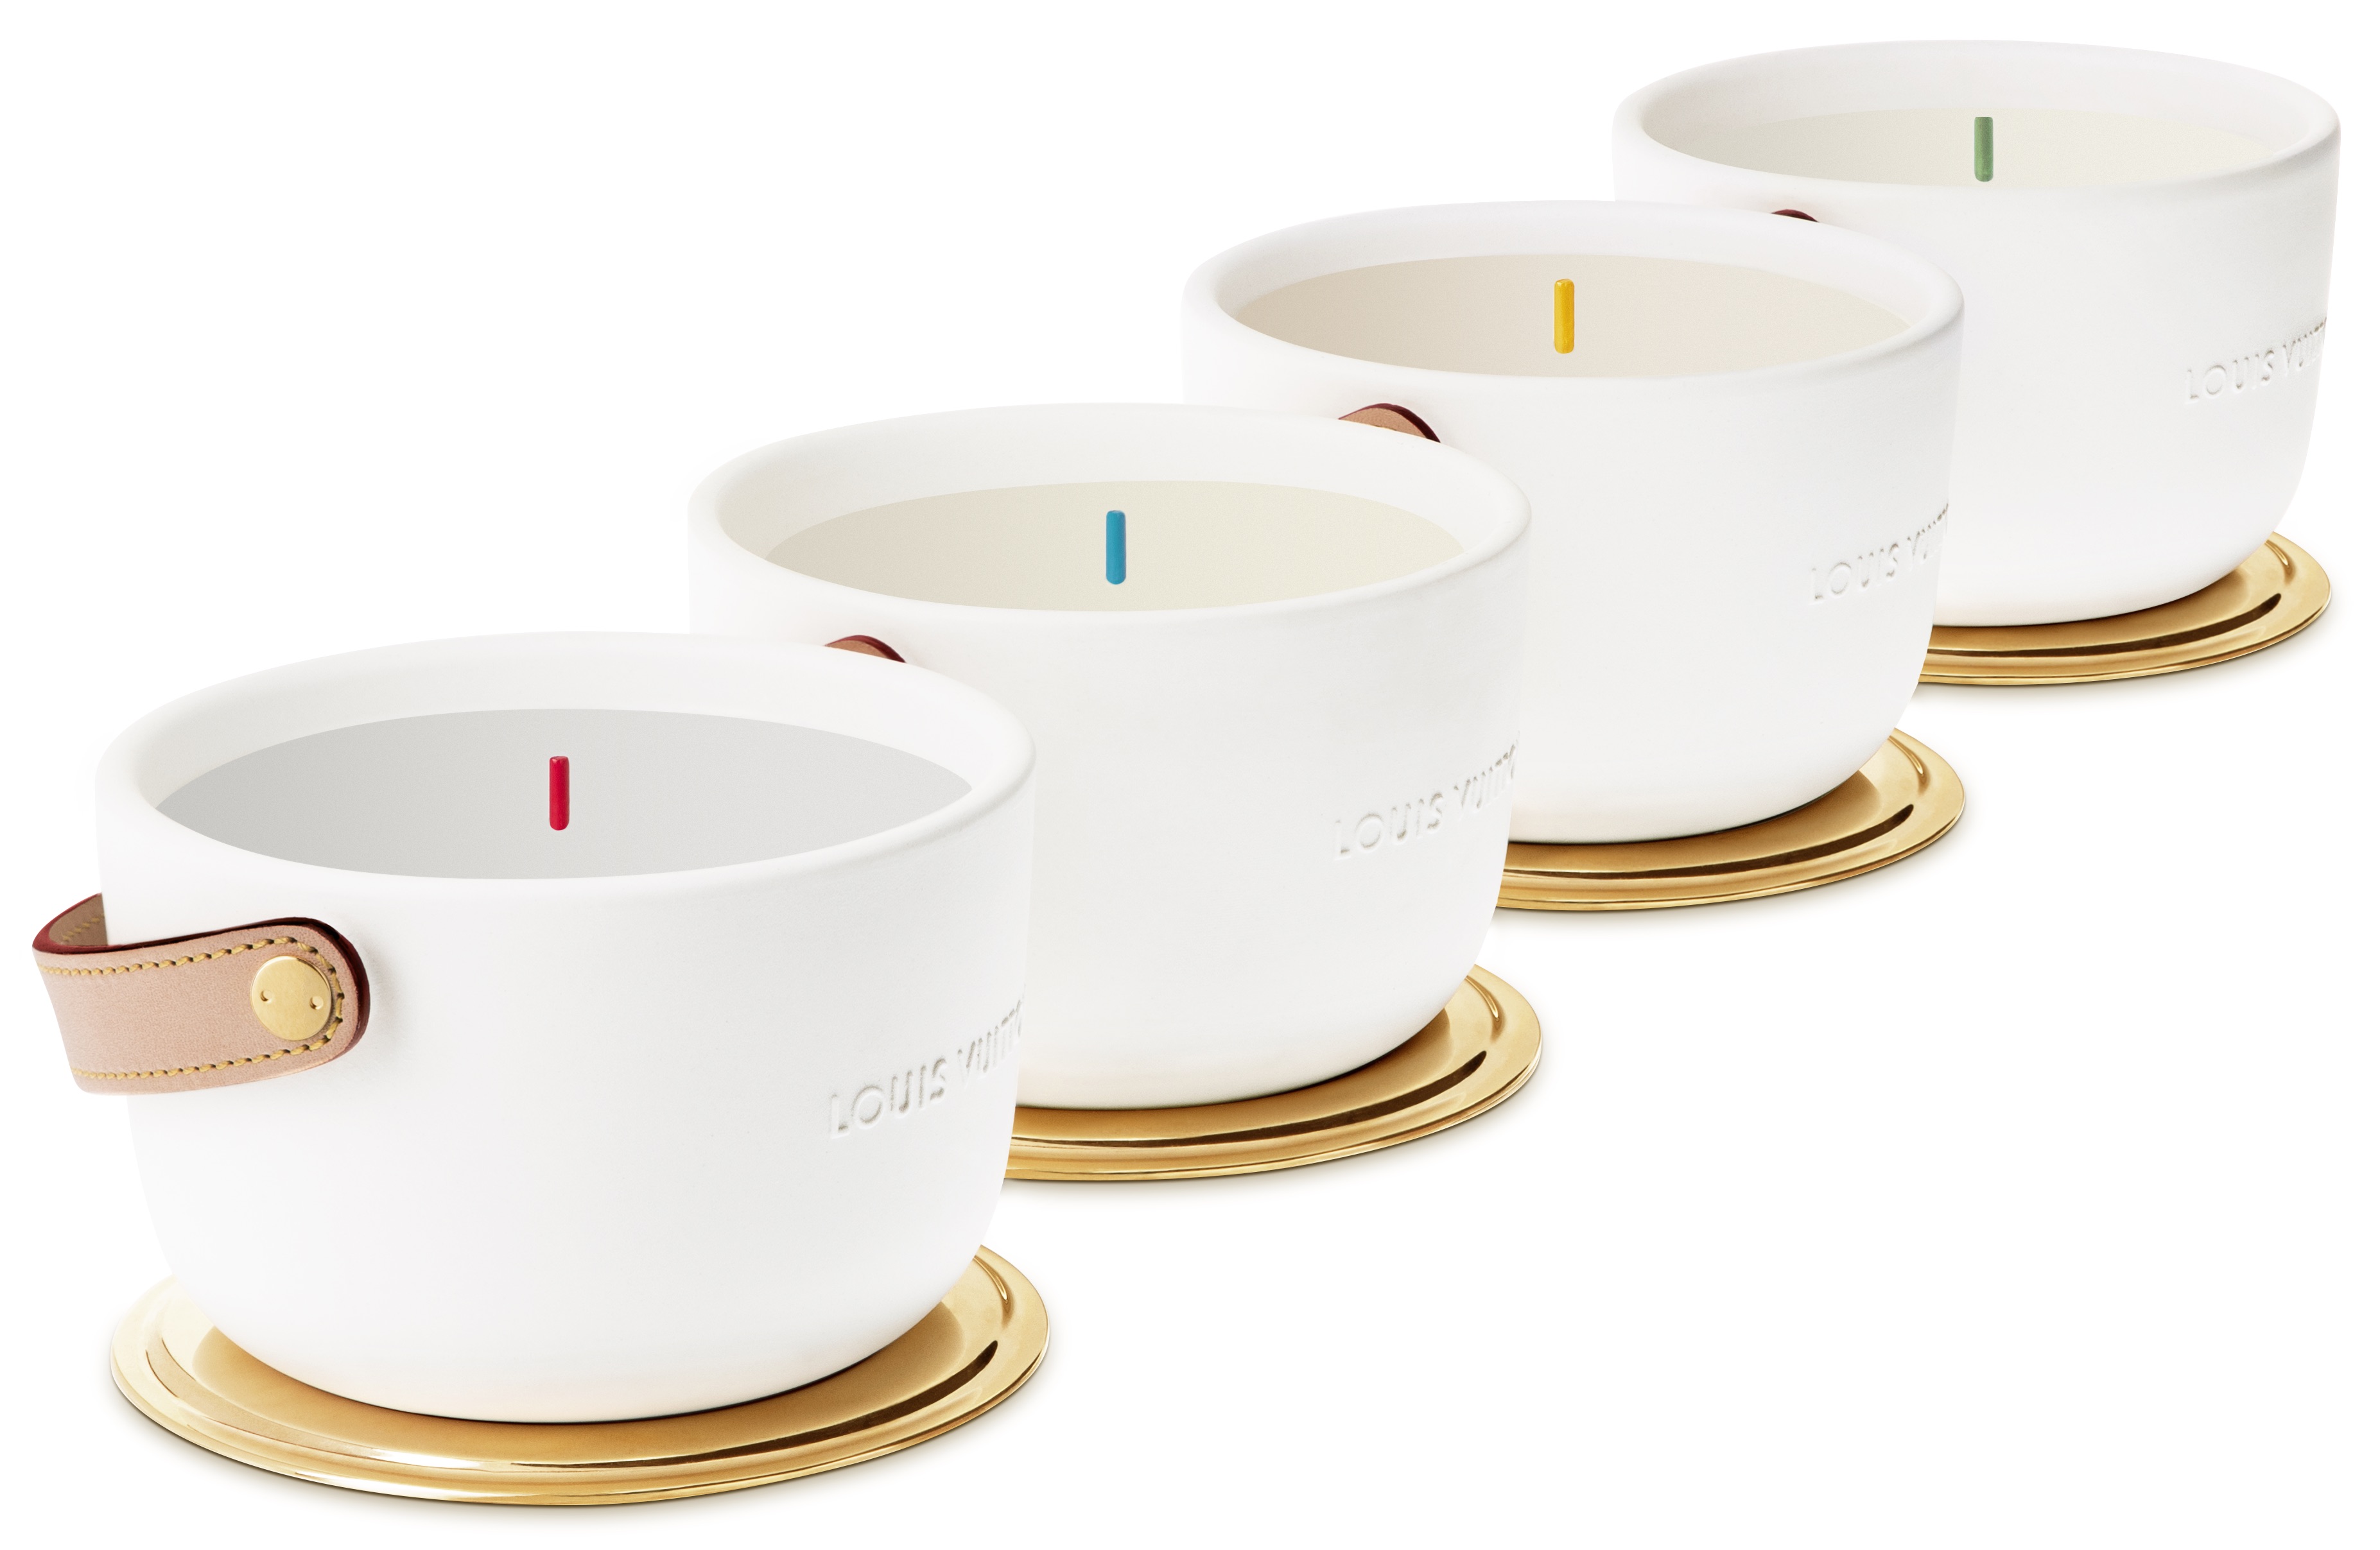 Louis Vuitton on X: A journey, at home. Introducing #LouisVuitton Perfumed  Candles, four fragrances dedicated for the home by Jacques Cavallier  Belletrud in a design by Marc Newson. Discover the new collection